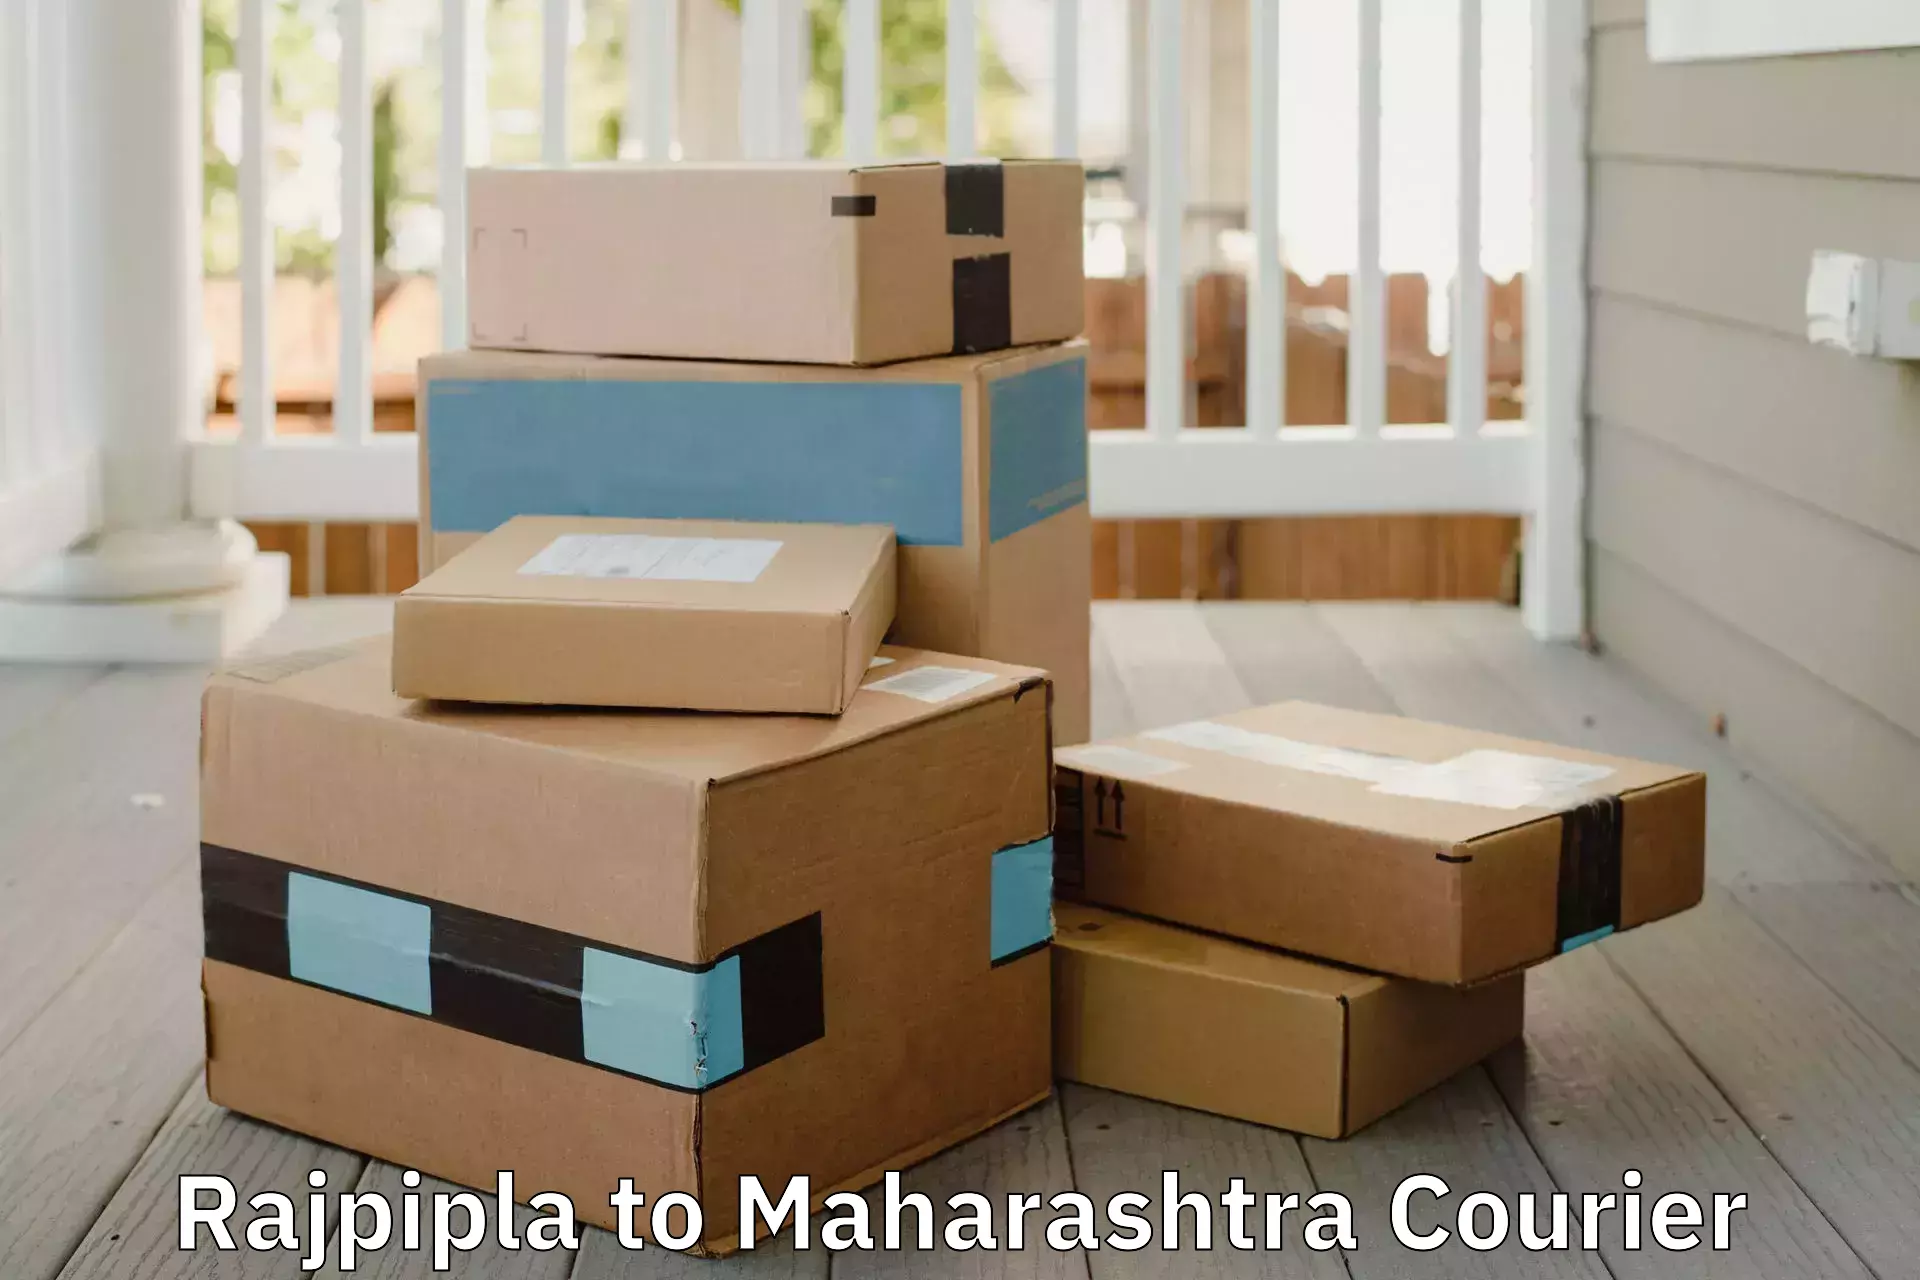 Moving and packing experts Rajpipla to Shirdi